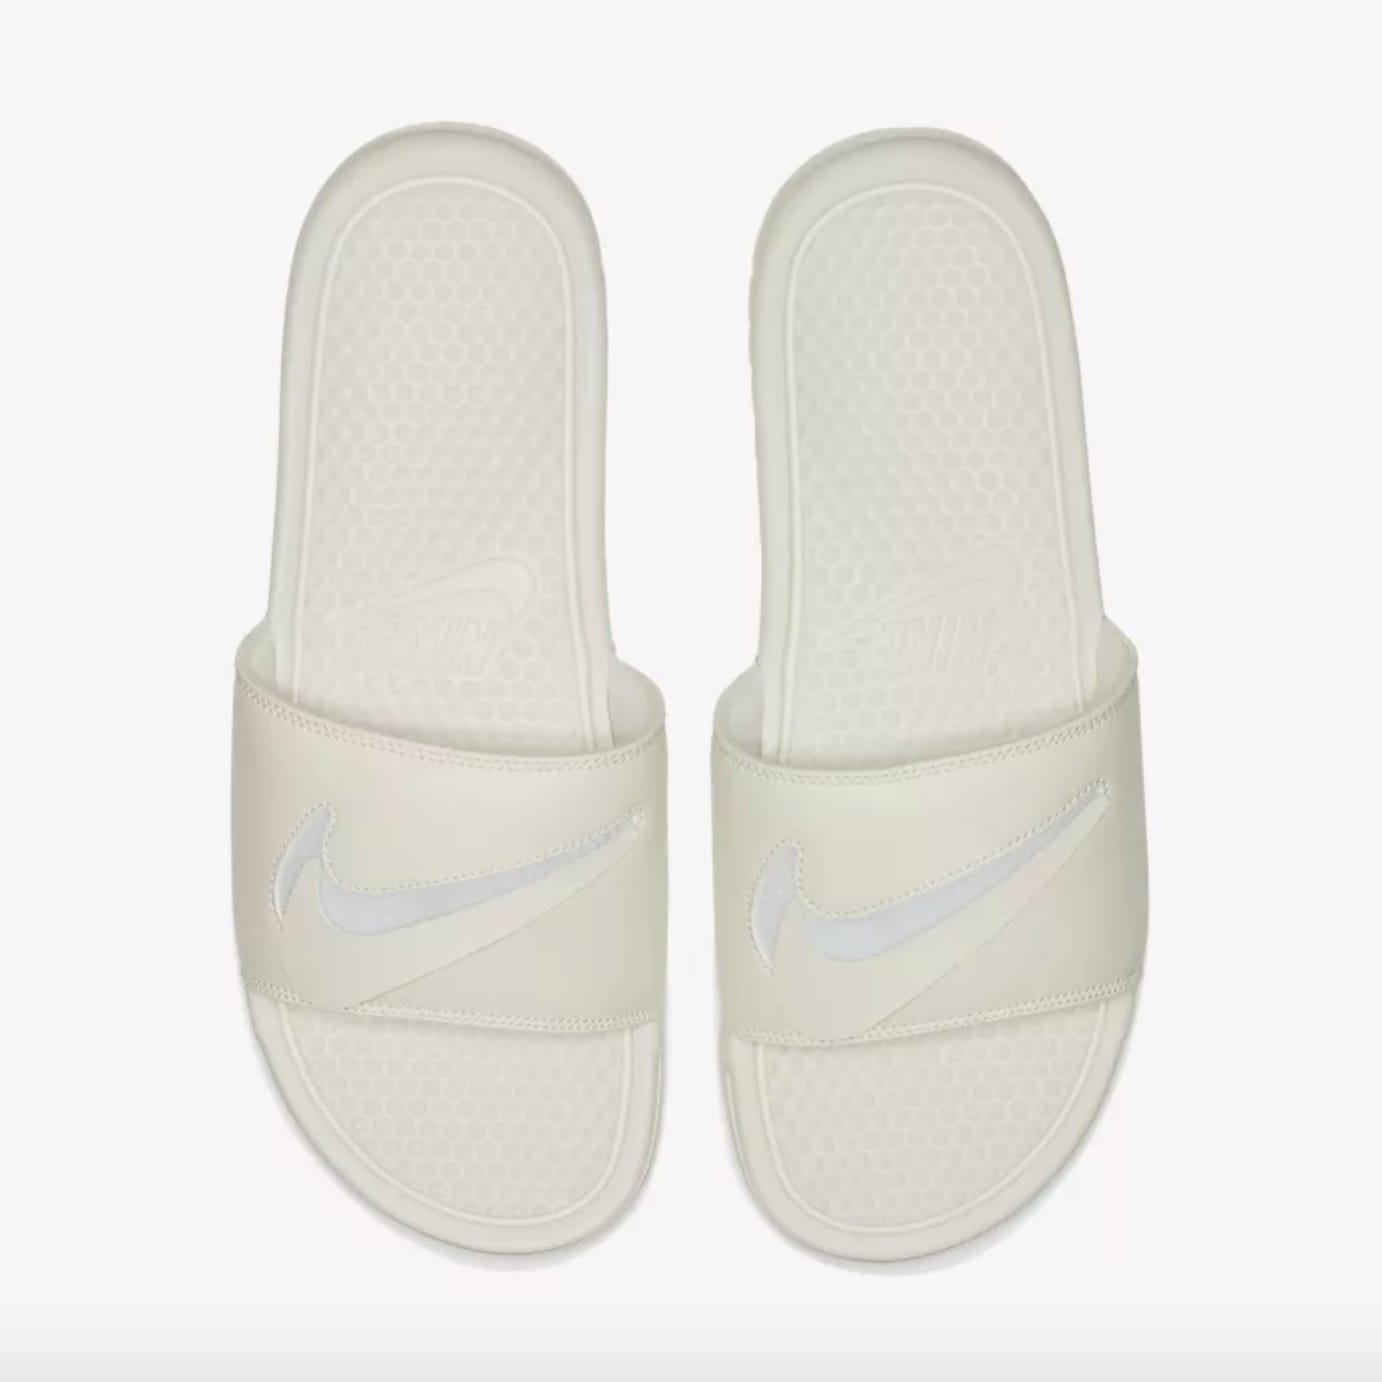 Relación Proporcional Coro Now You Can Change the Swoosh on Your Slides Too | Complex